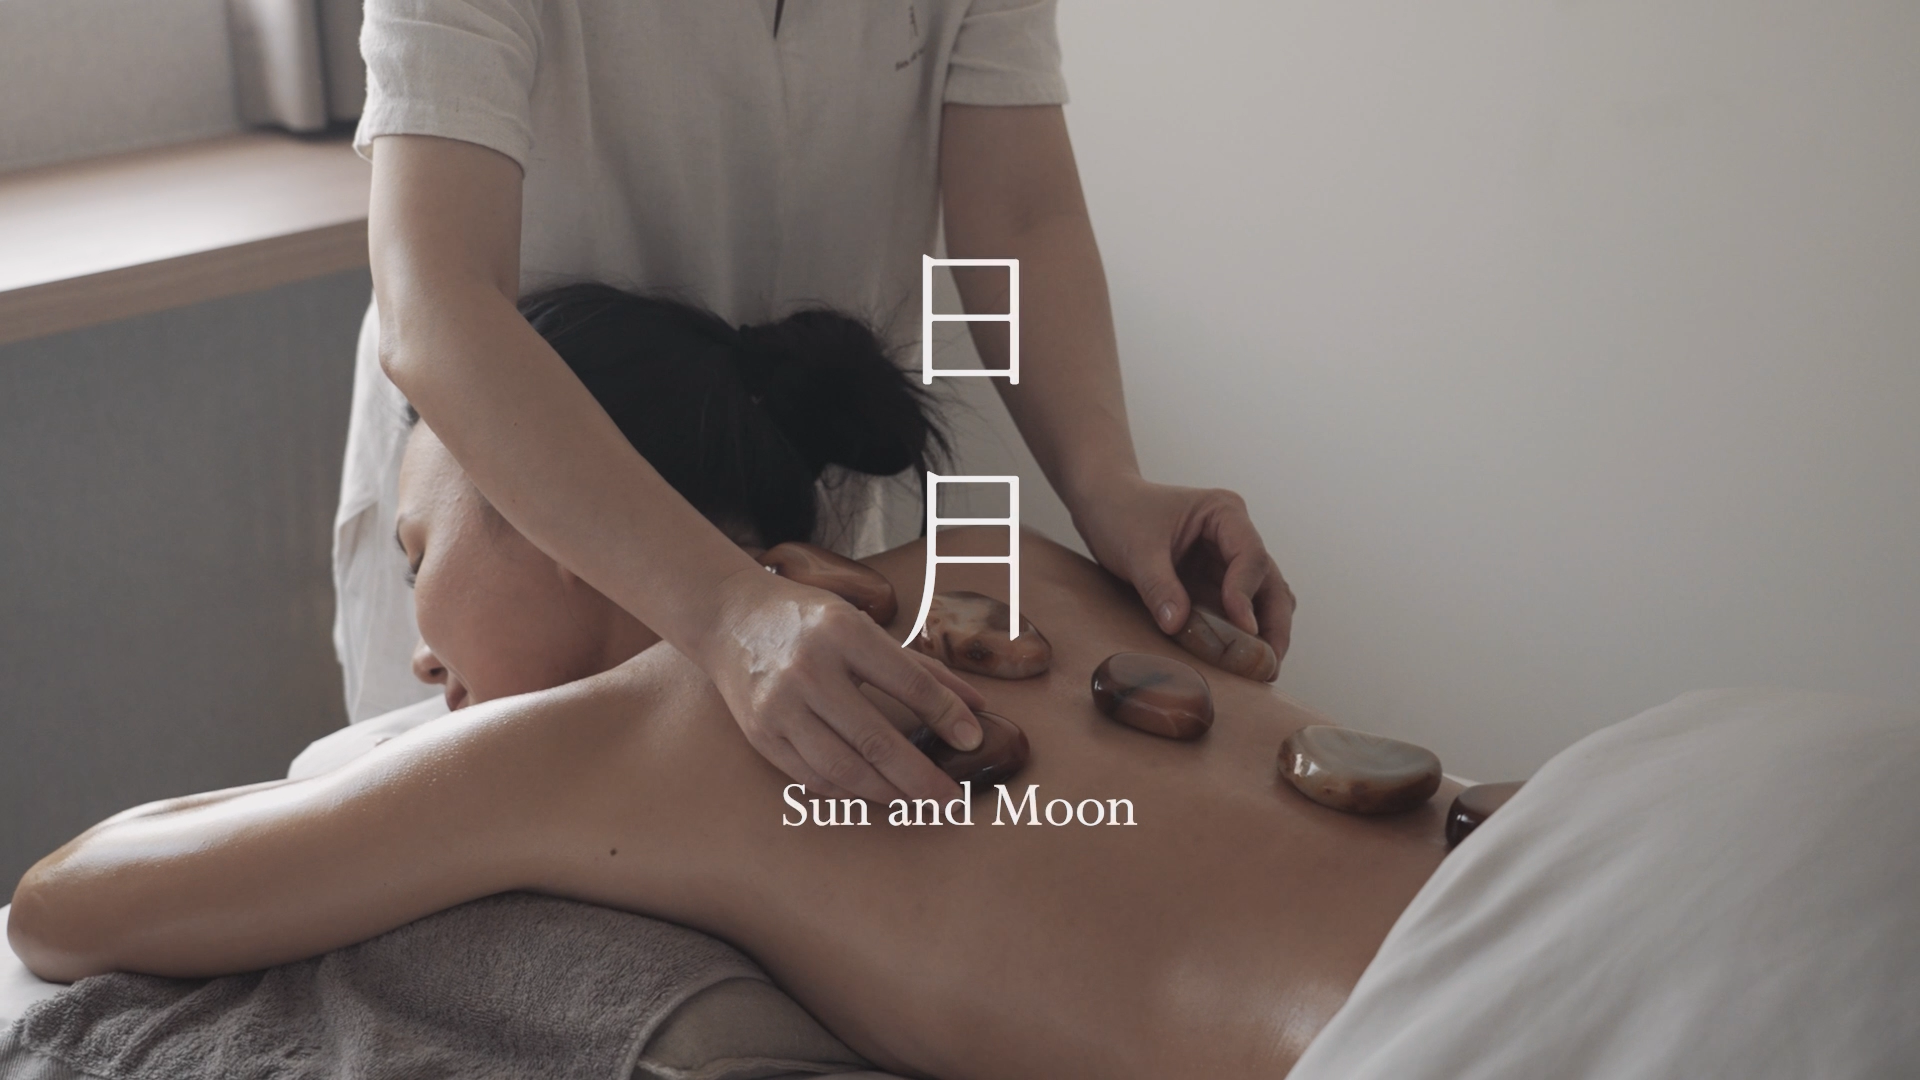 How Sun and Moon Massage makes appointment booking more efficient with SleekFlow